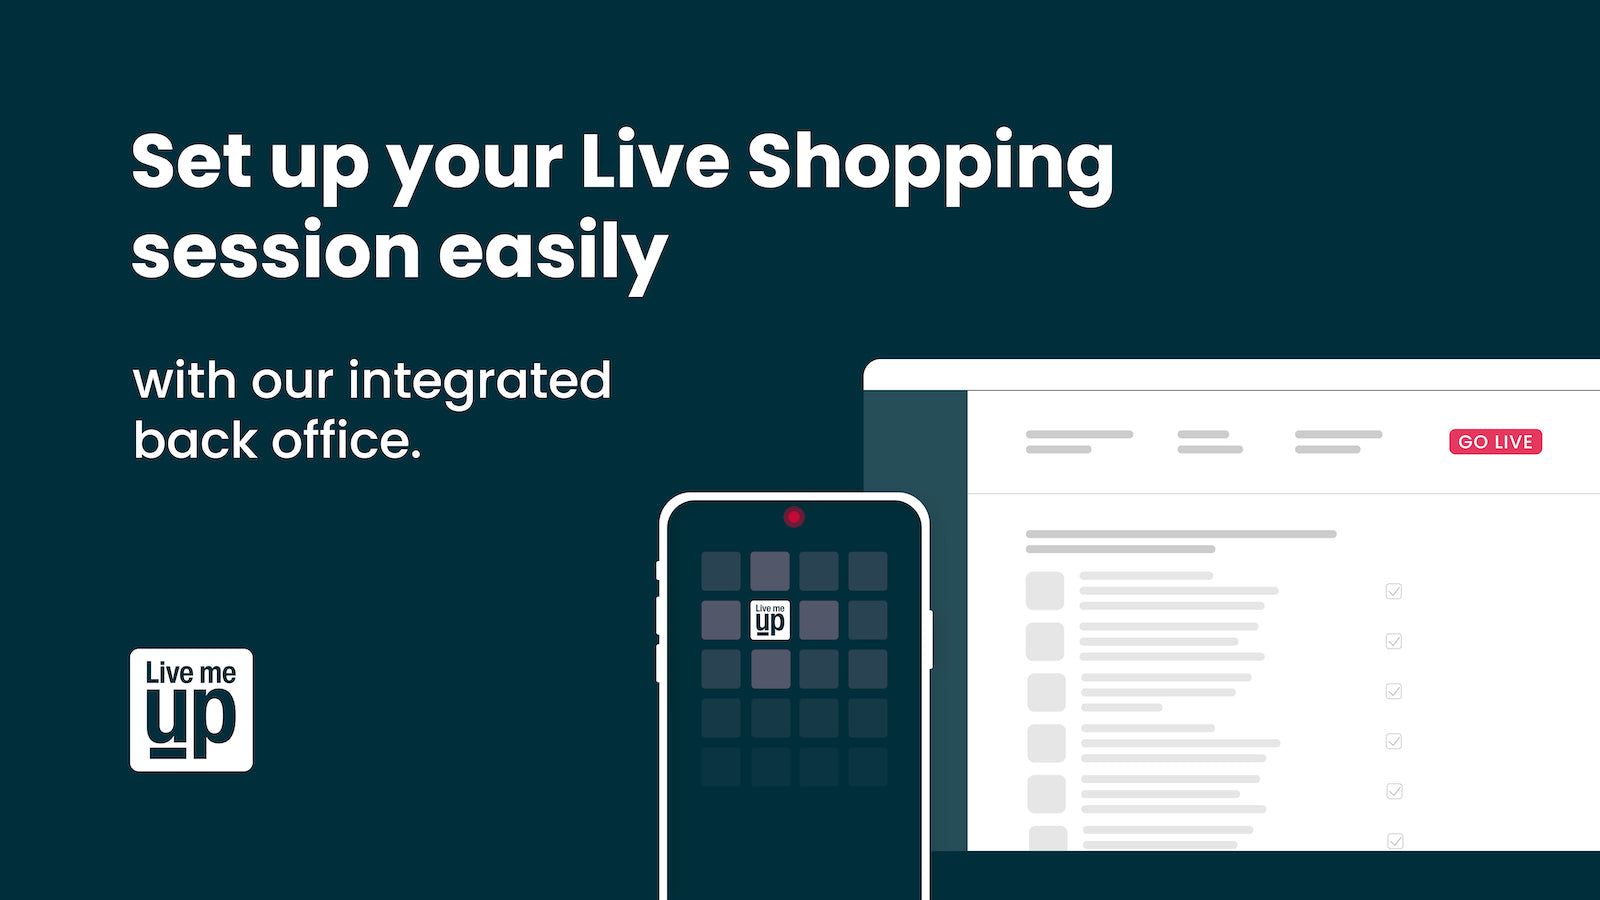 Set up your Live shopping session easily